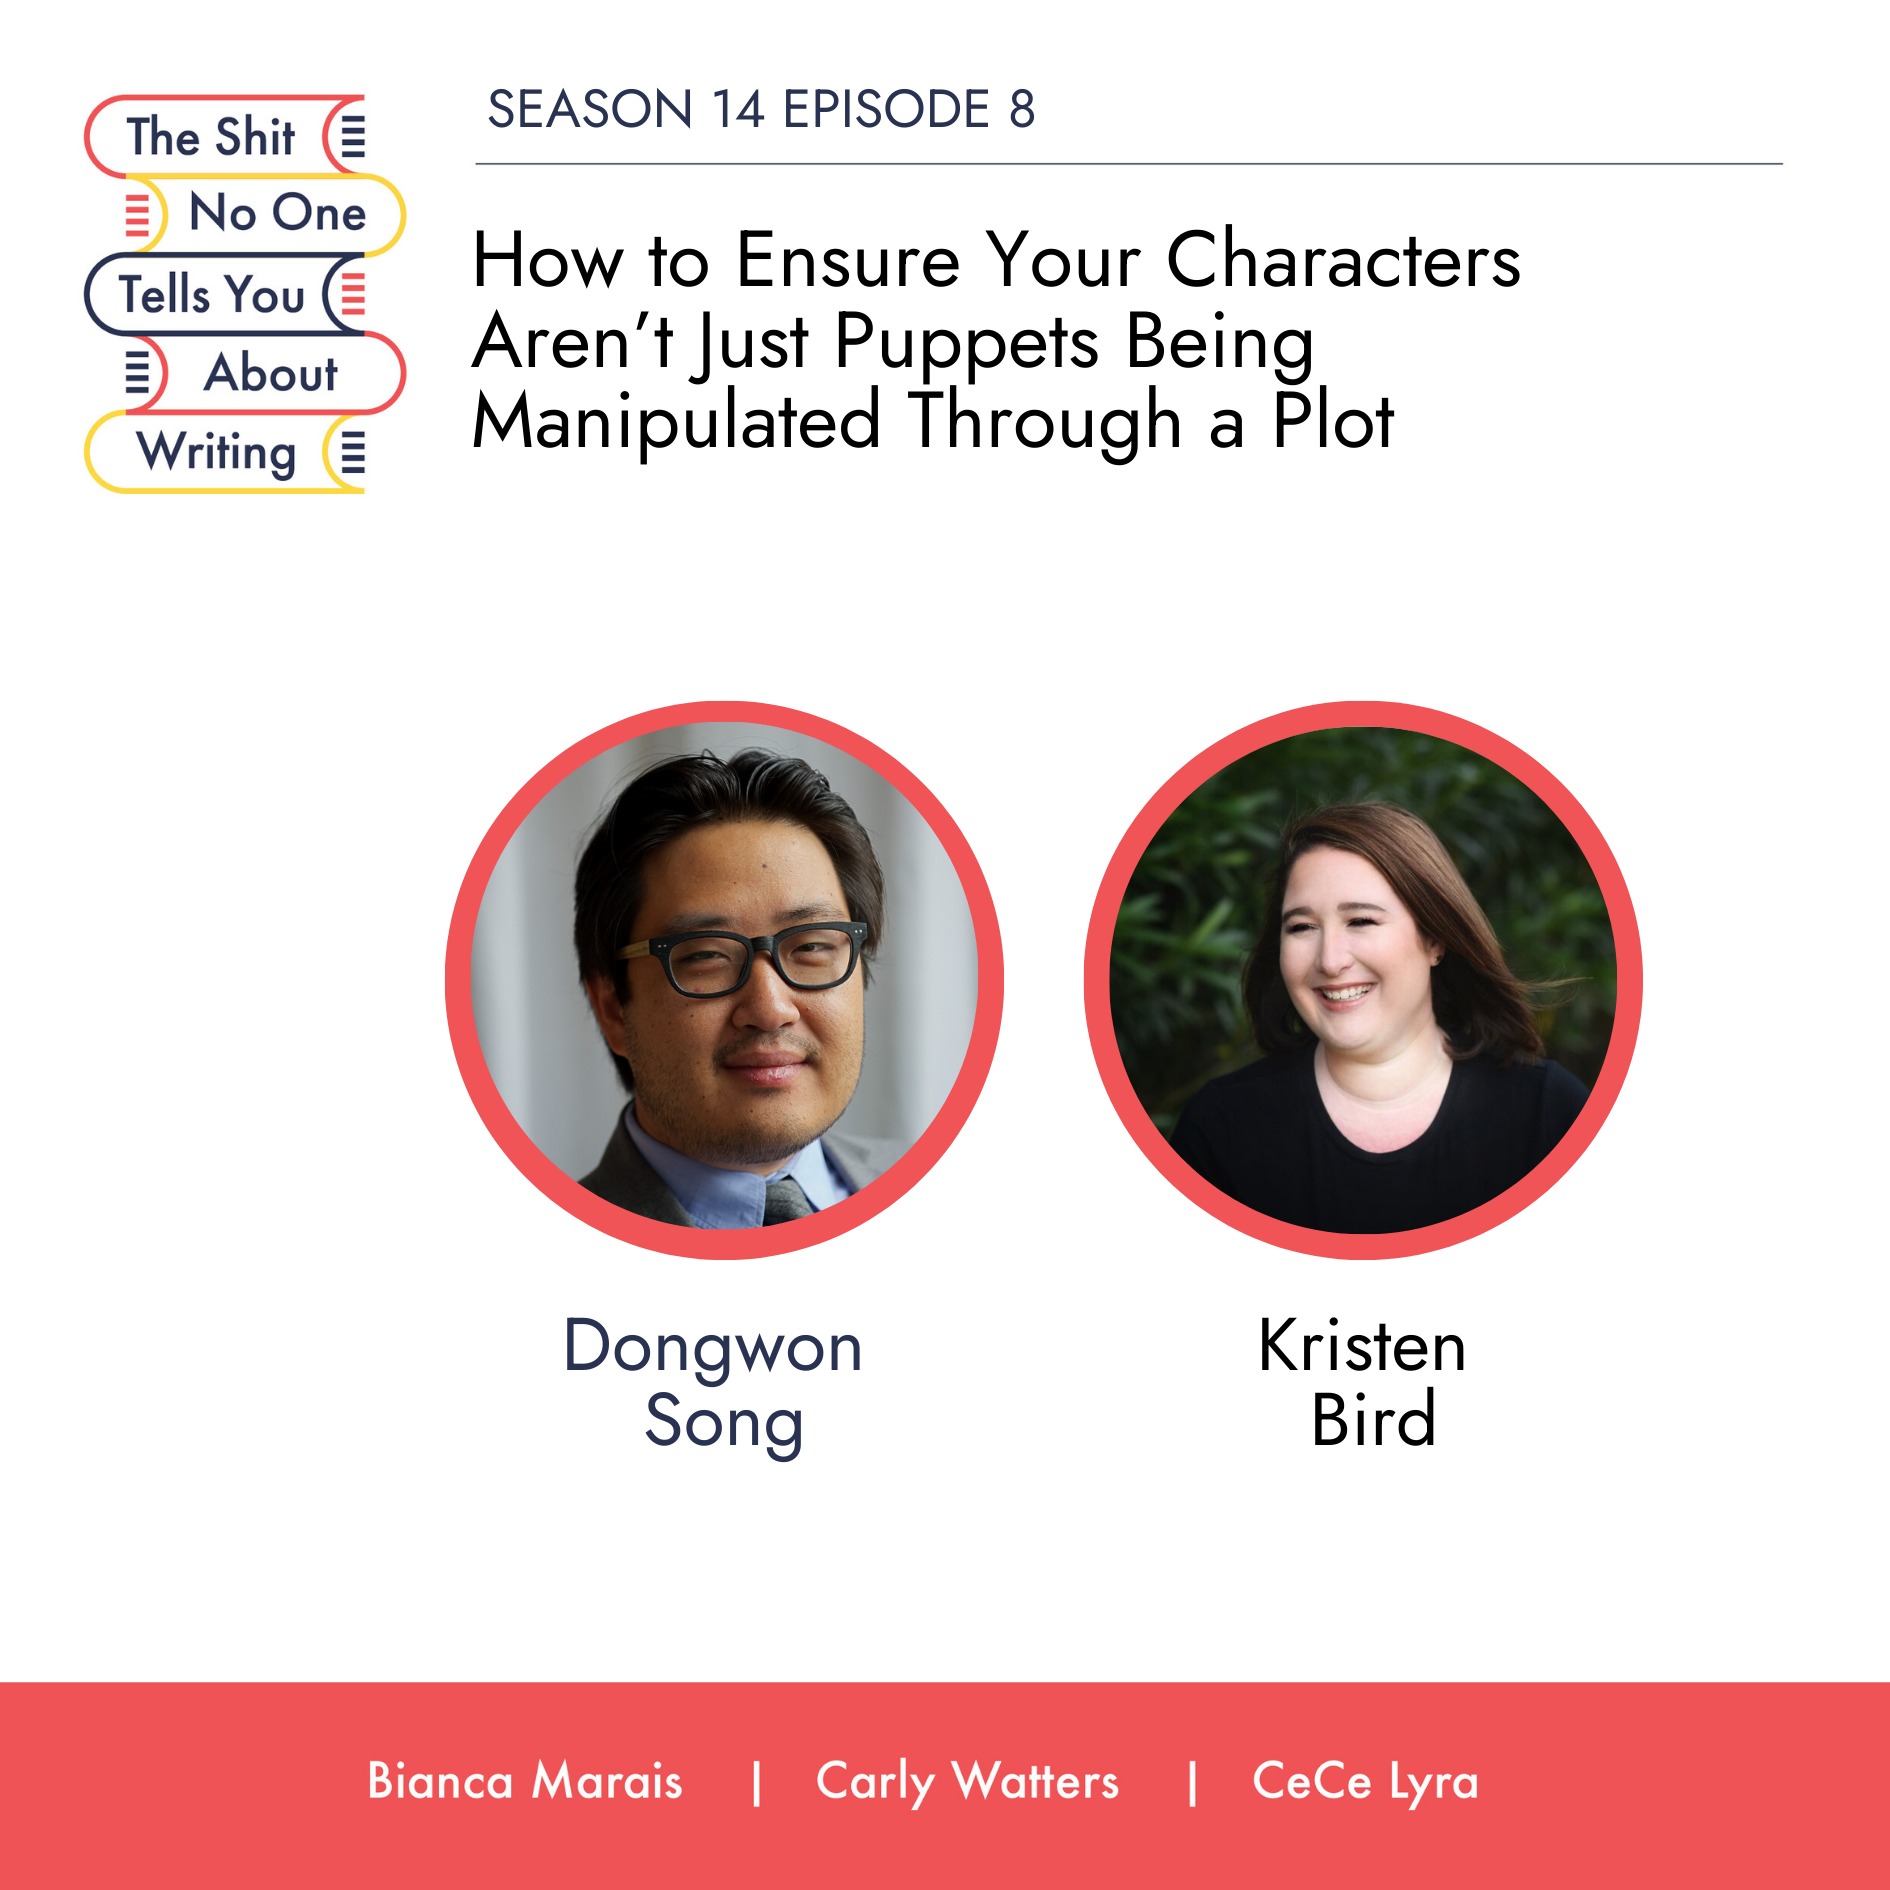 How to Ensure Your Characters Aren’t Just Puppets Being Manipulated Through a Plot